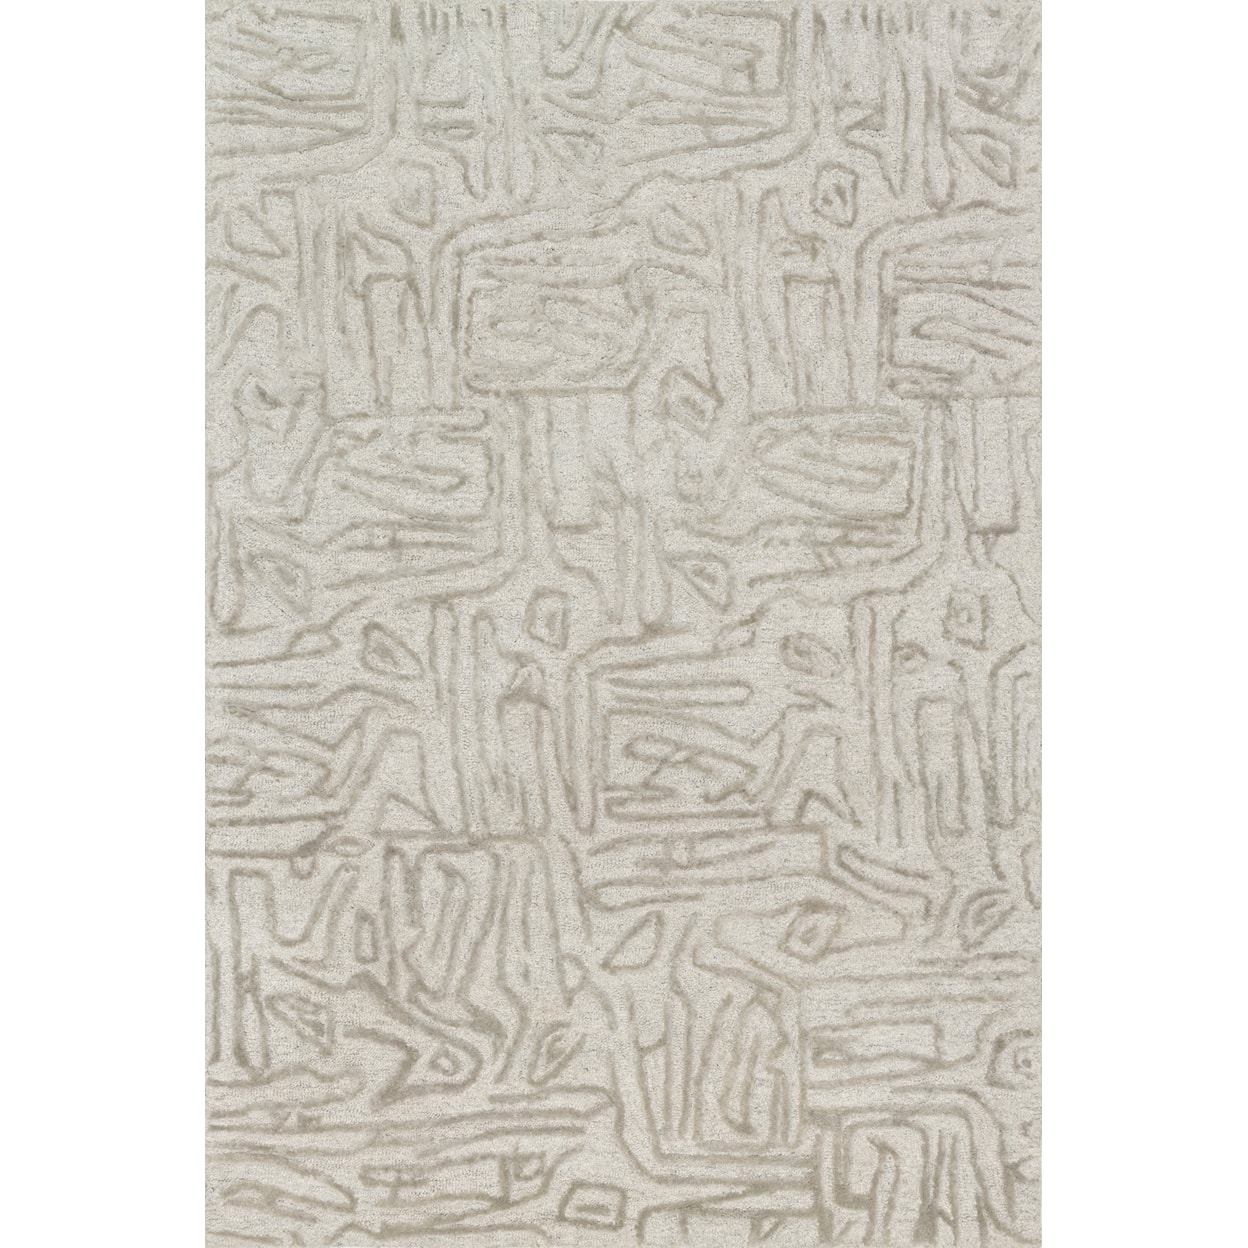 Reeds Rugs Juneau 3'6" x 5'6" Silver / Silver Rug